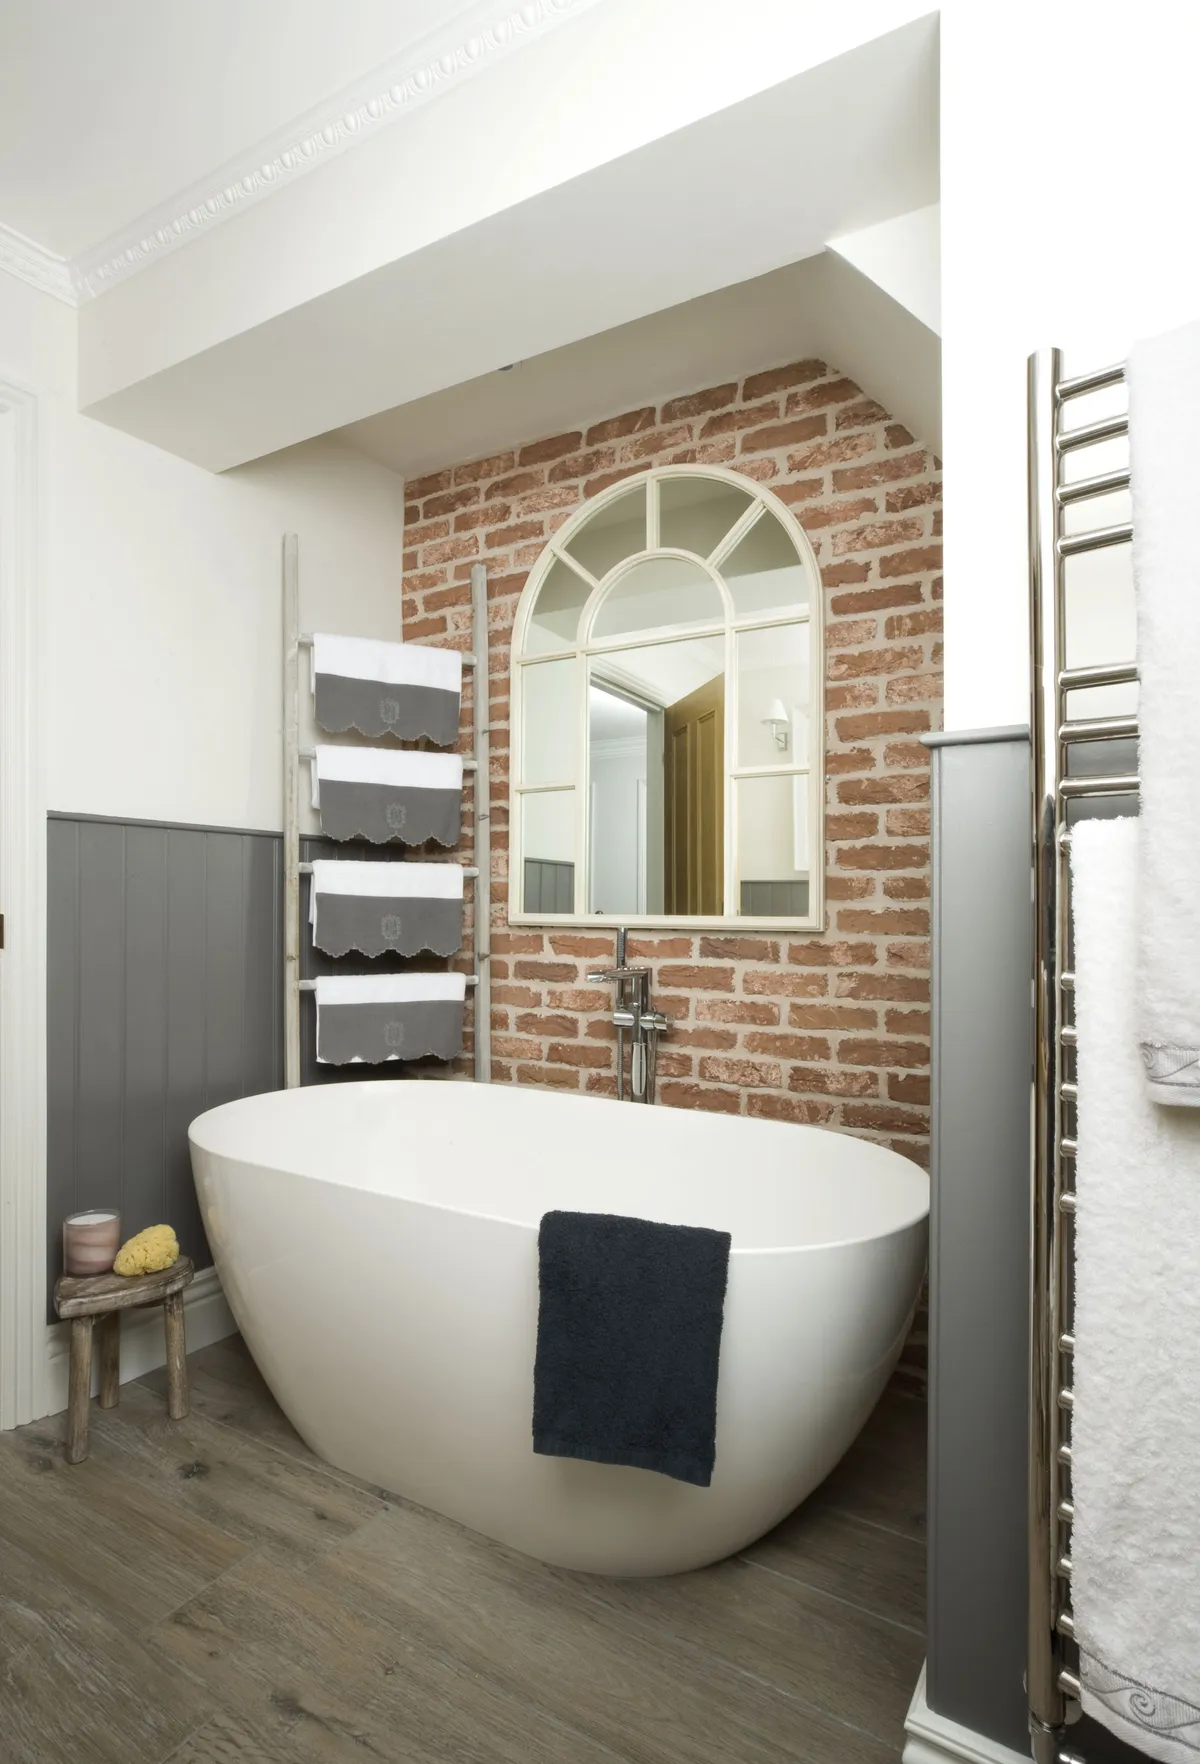 Lisa paired a contemporary bath with a free-standing tap to create a boutique hotel feel. The feature brickwork wall is made from brick-slip tiles – these thin slivers of real brick are a fast, stylish alternative to the real thing